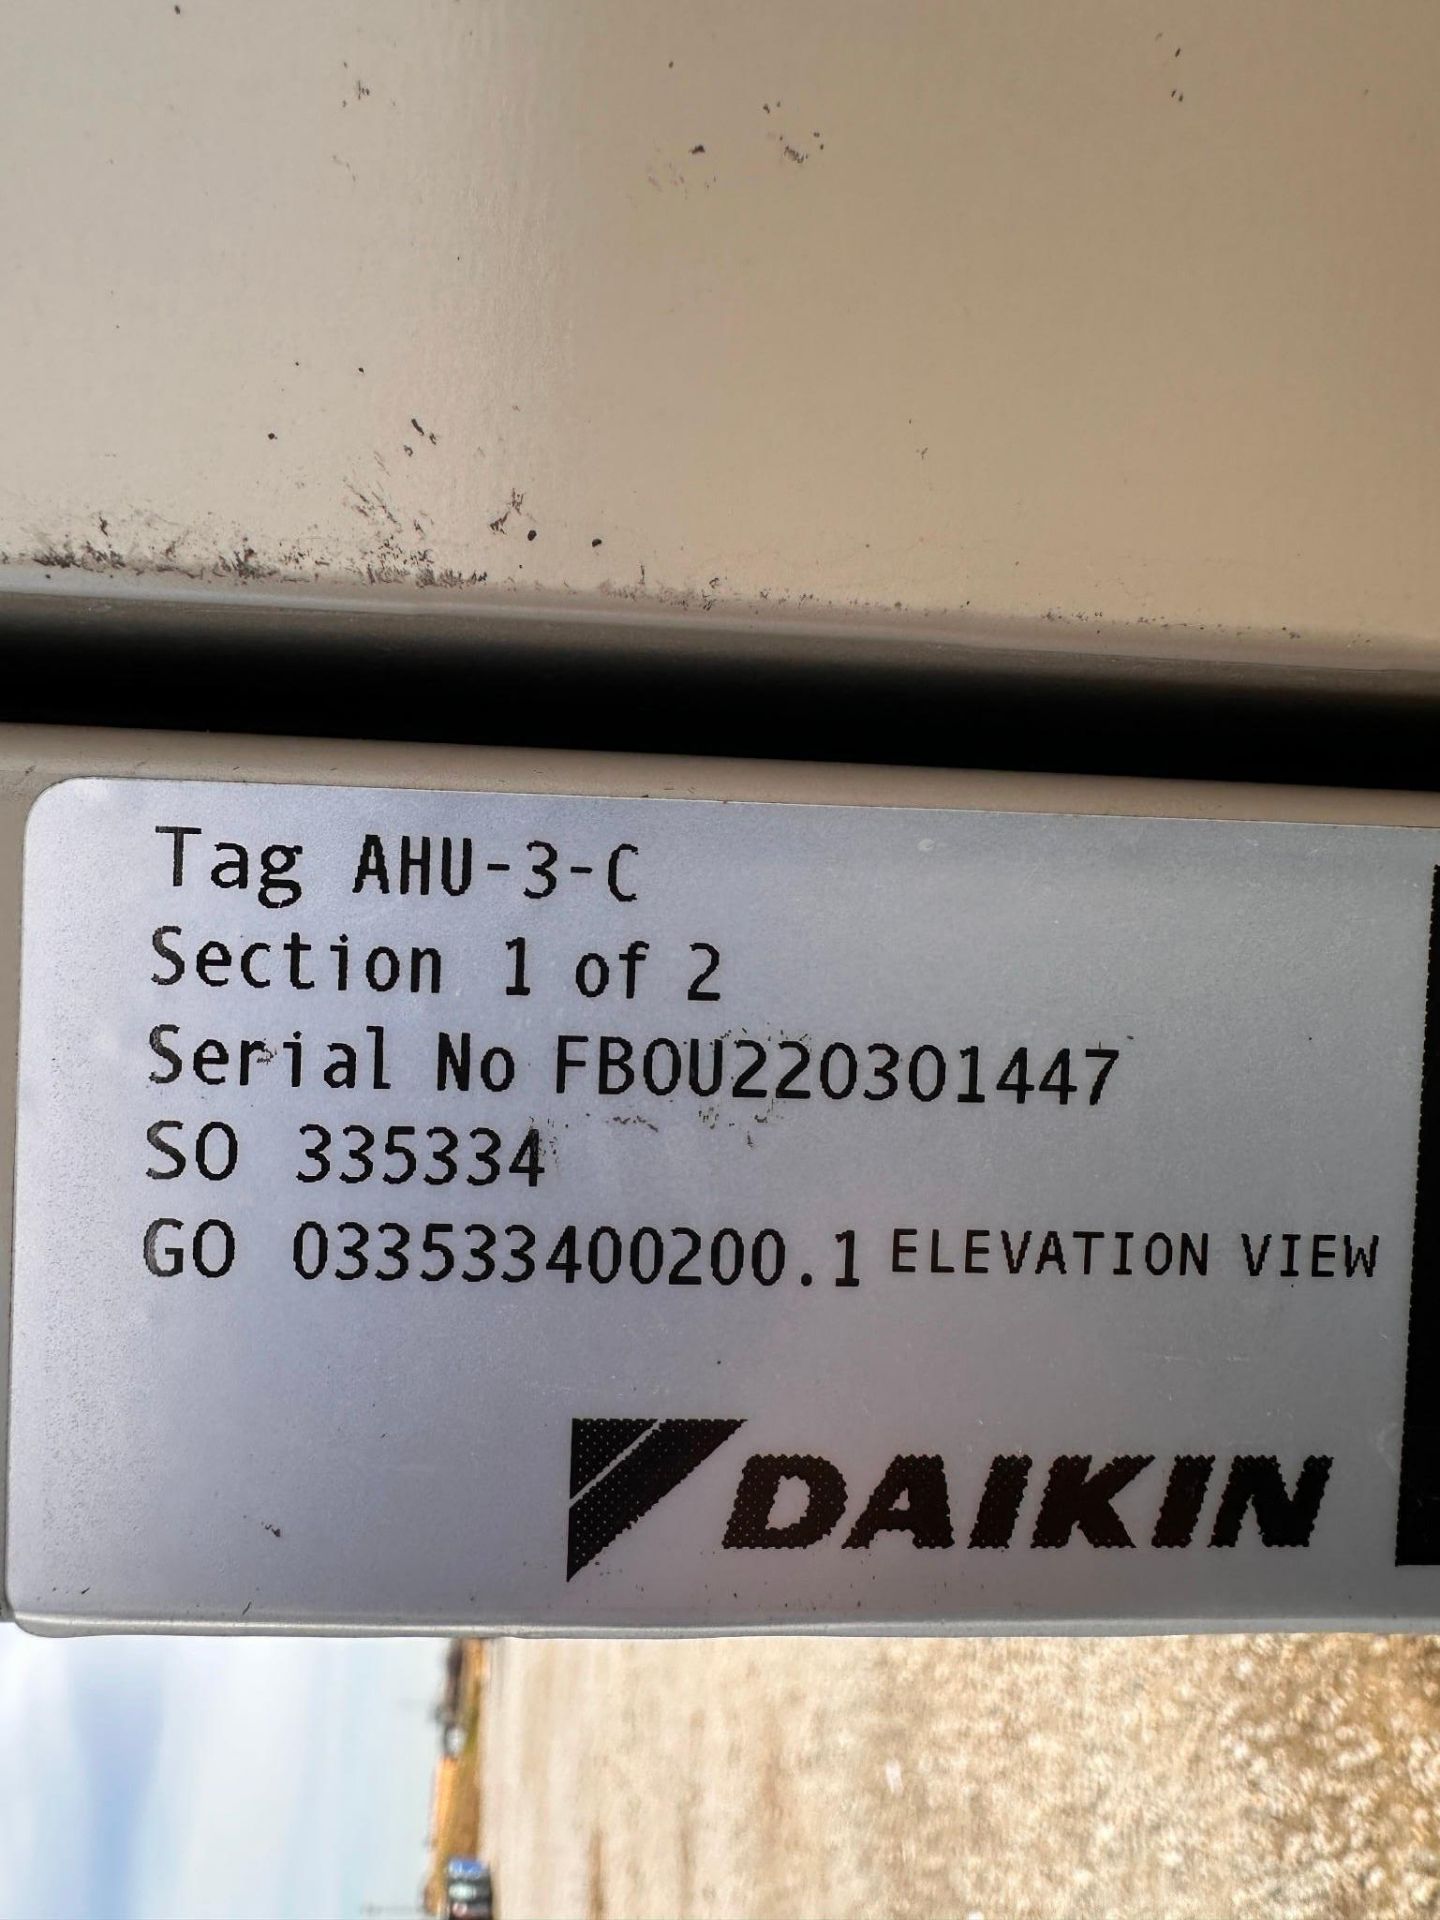 DAIKIN MODEL OAH 032GDQM CLEAR AIR PACKAGED AIR CONDITIONING UNIT - Image 26 of 31